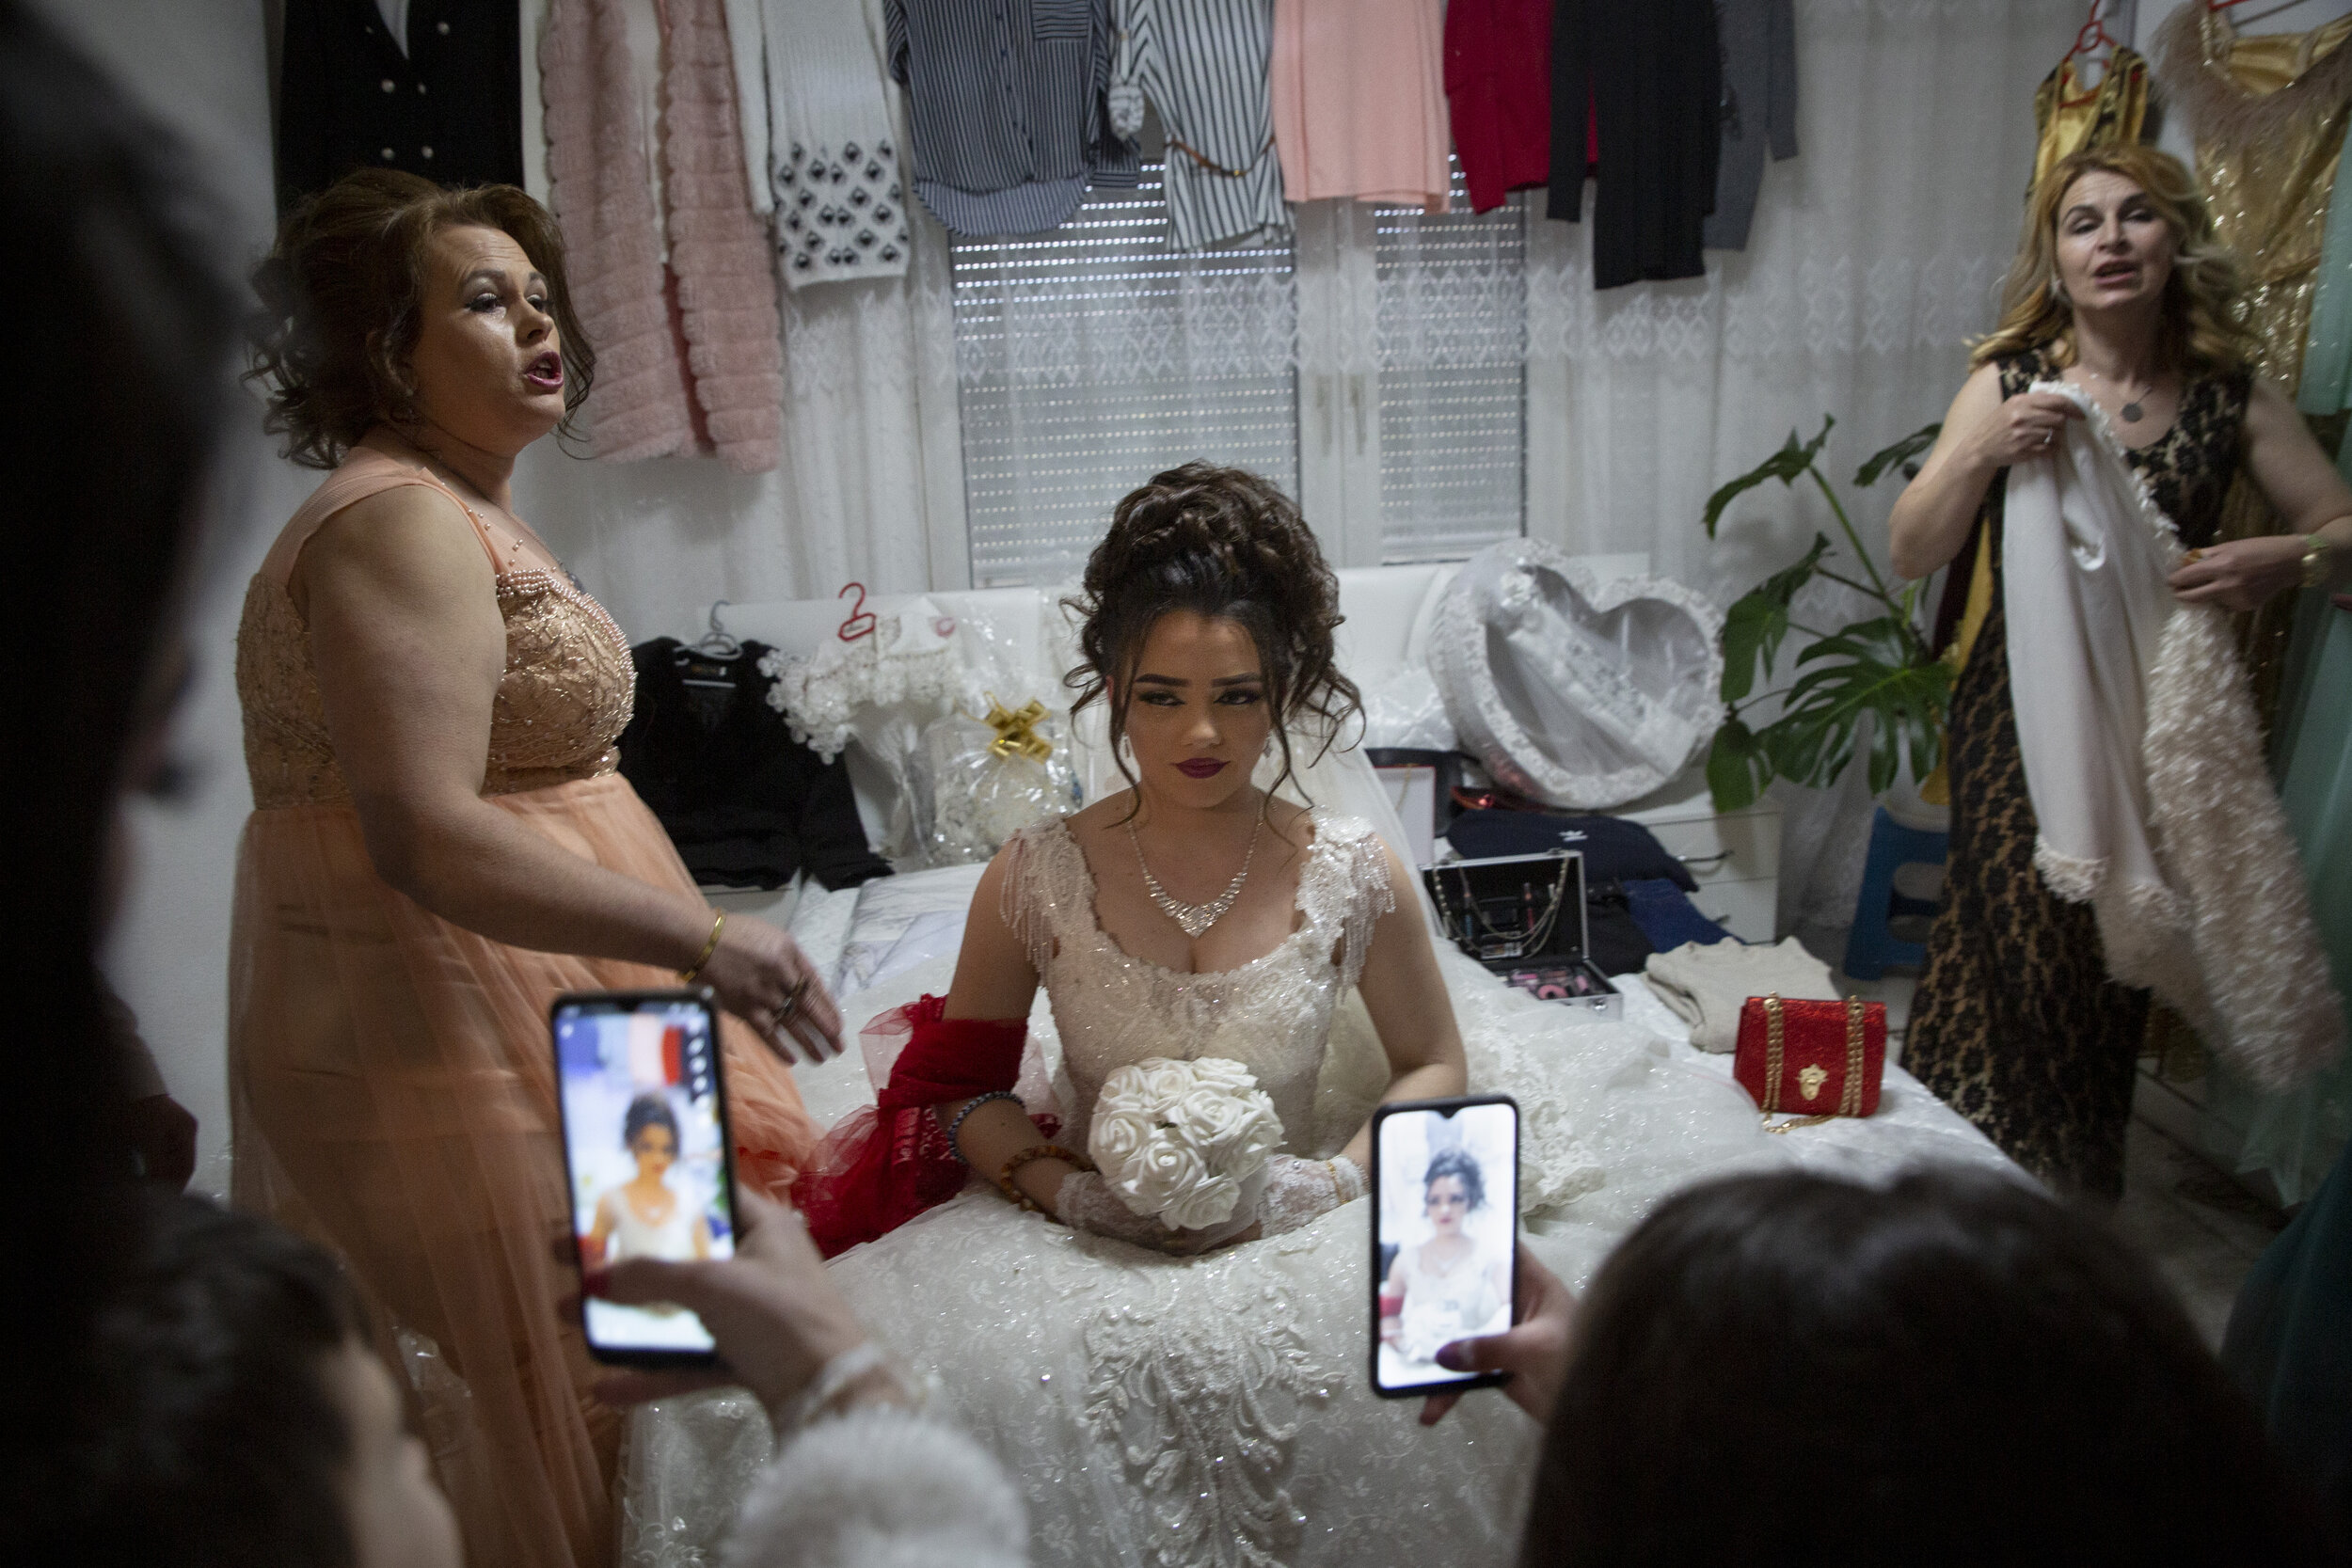  Qendresa Hasani, 16, sits patiently while her groom’s family video calls relatives abroad on Hasani’s wedding day, in her husband’s village outside of Mitrovica, Kosovo. In Kosovo, the minimum age to legally marry drops from 18 to 16 with parental c